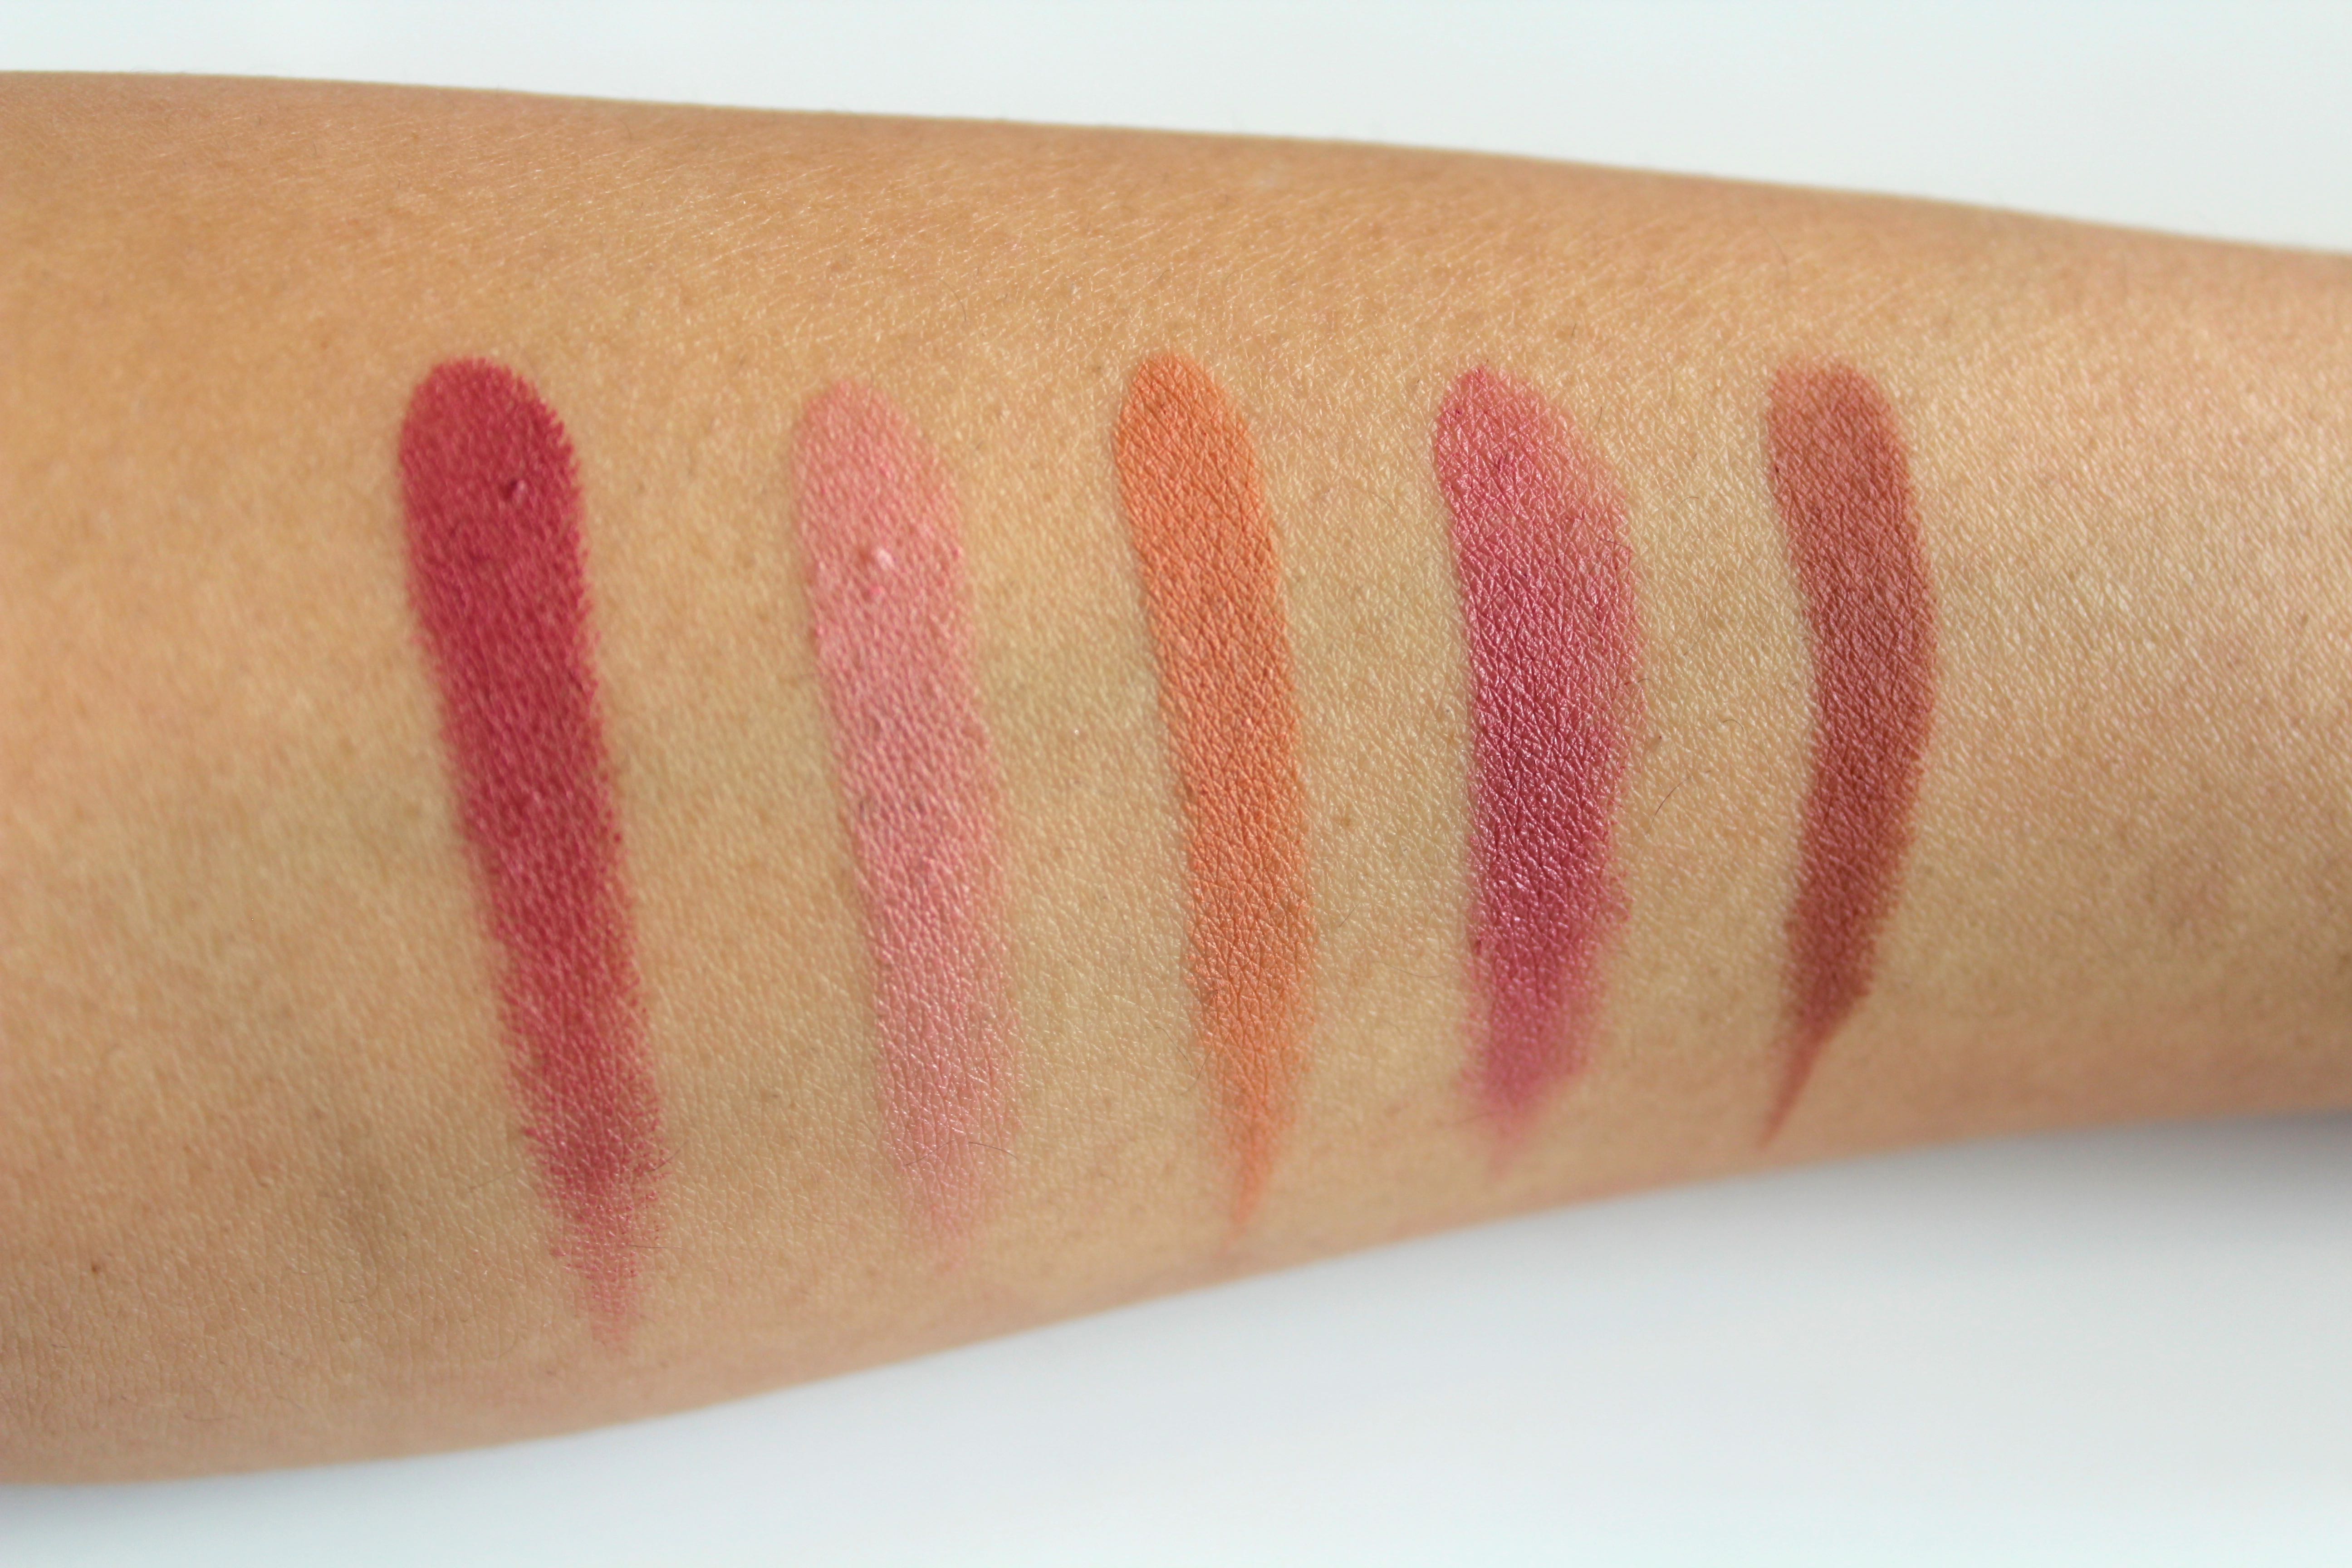 Swatches L-R: Berry Smoothie, Buttercup, Nude, Rodeo Drive & 1995